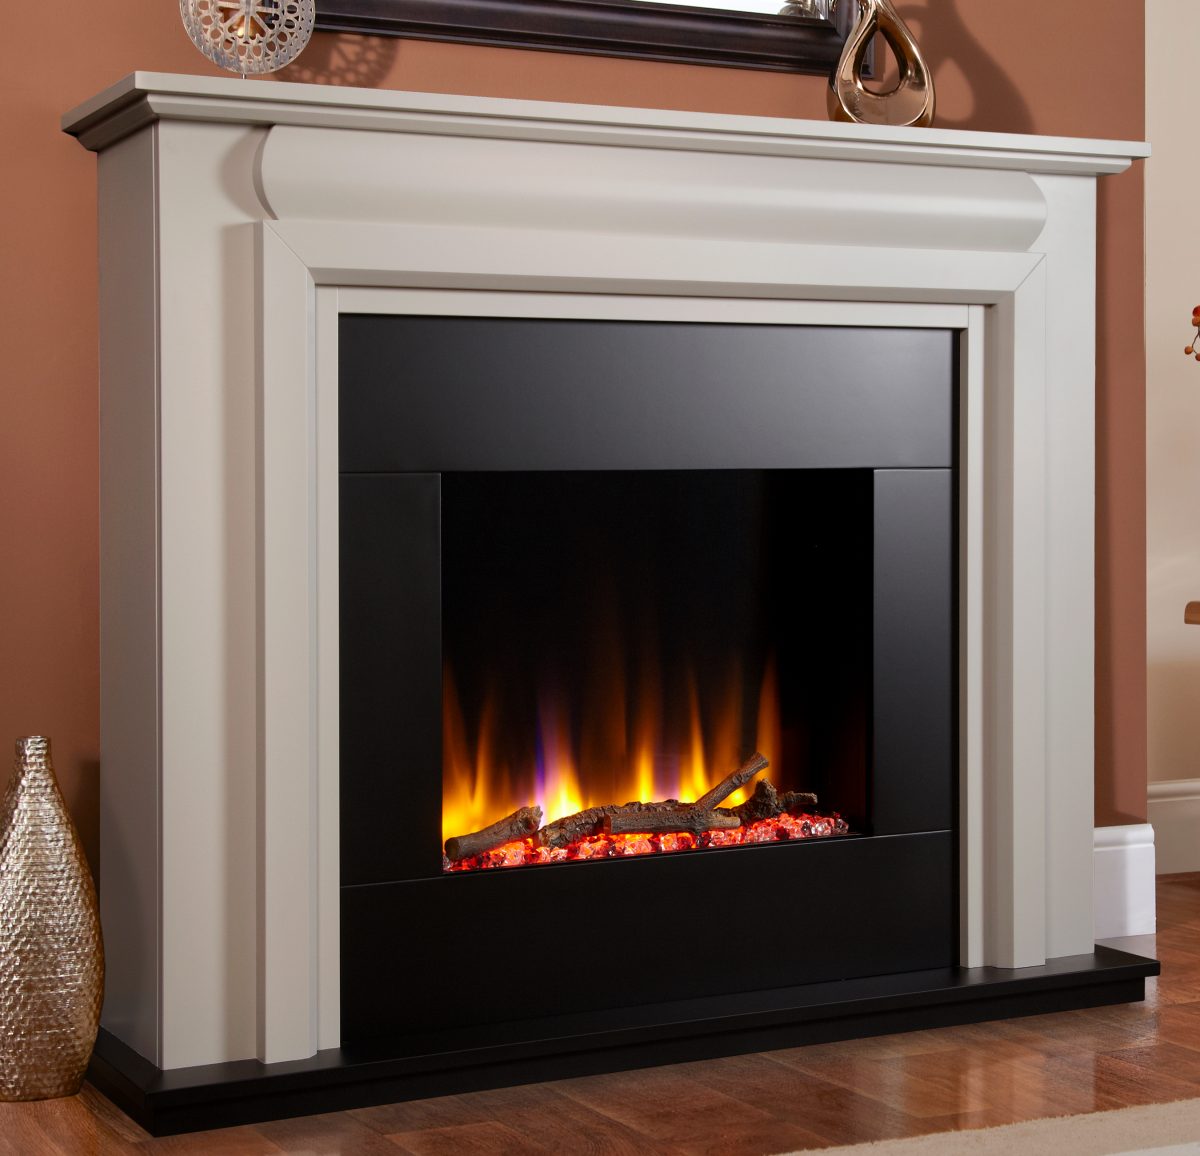 Celsi Ultiflame VR 22″ Callisto Electric Fireplace Suite in Smooth Mist